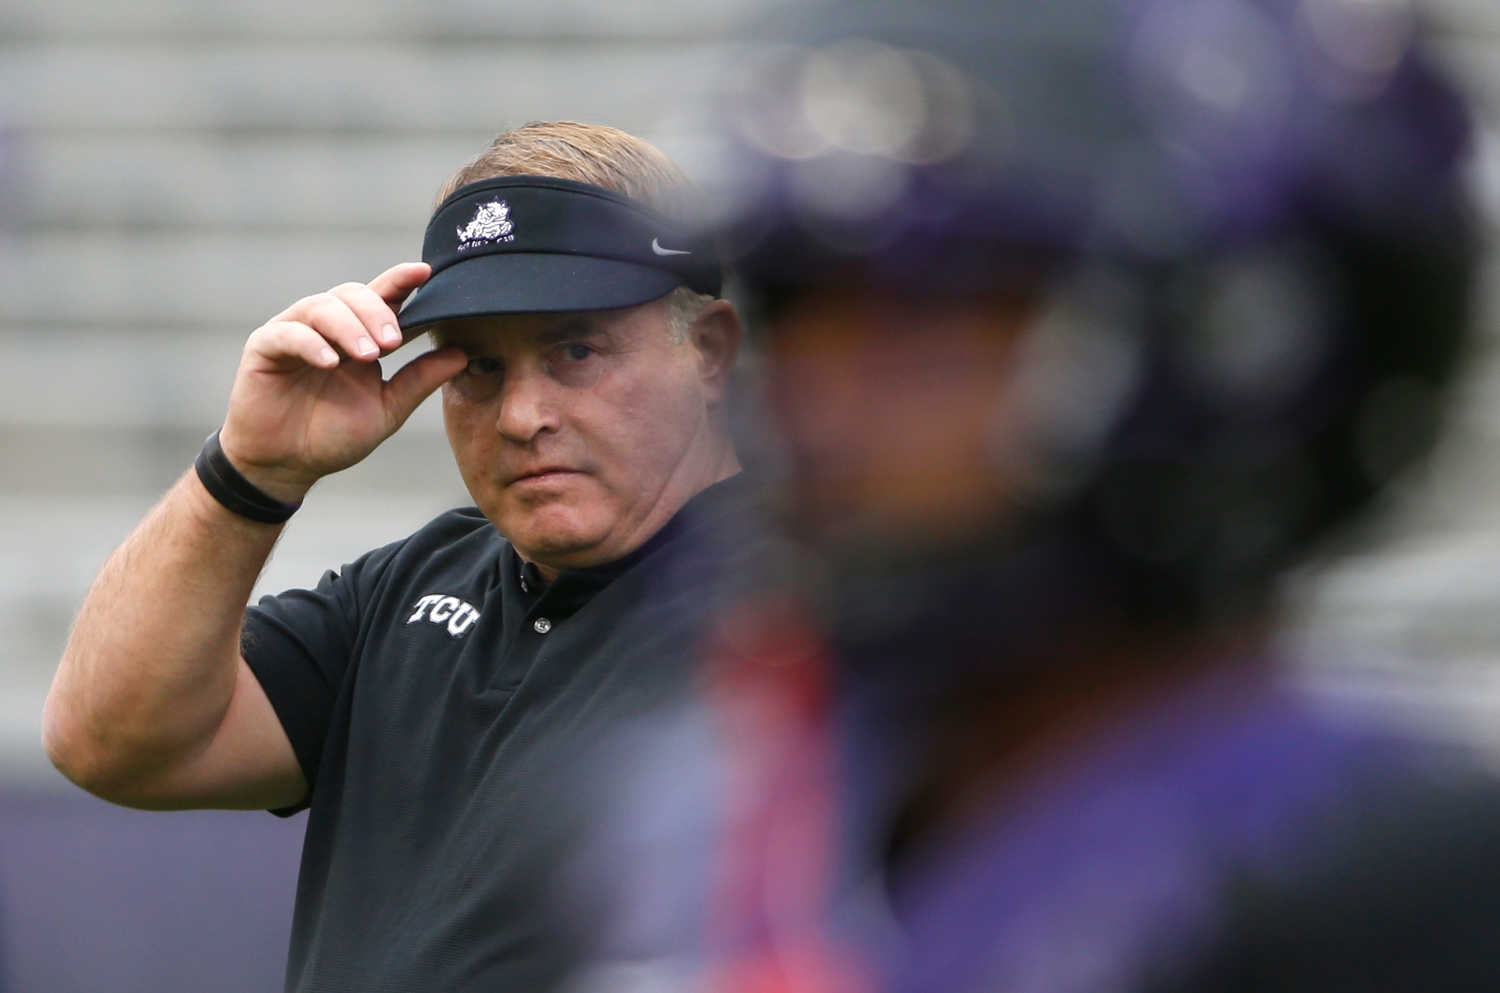 Gary Patterson Out At Tcu In Nd Season Coaching Horned Frogs Cbs Dallas Fort Worth